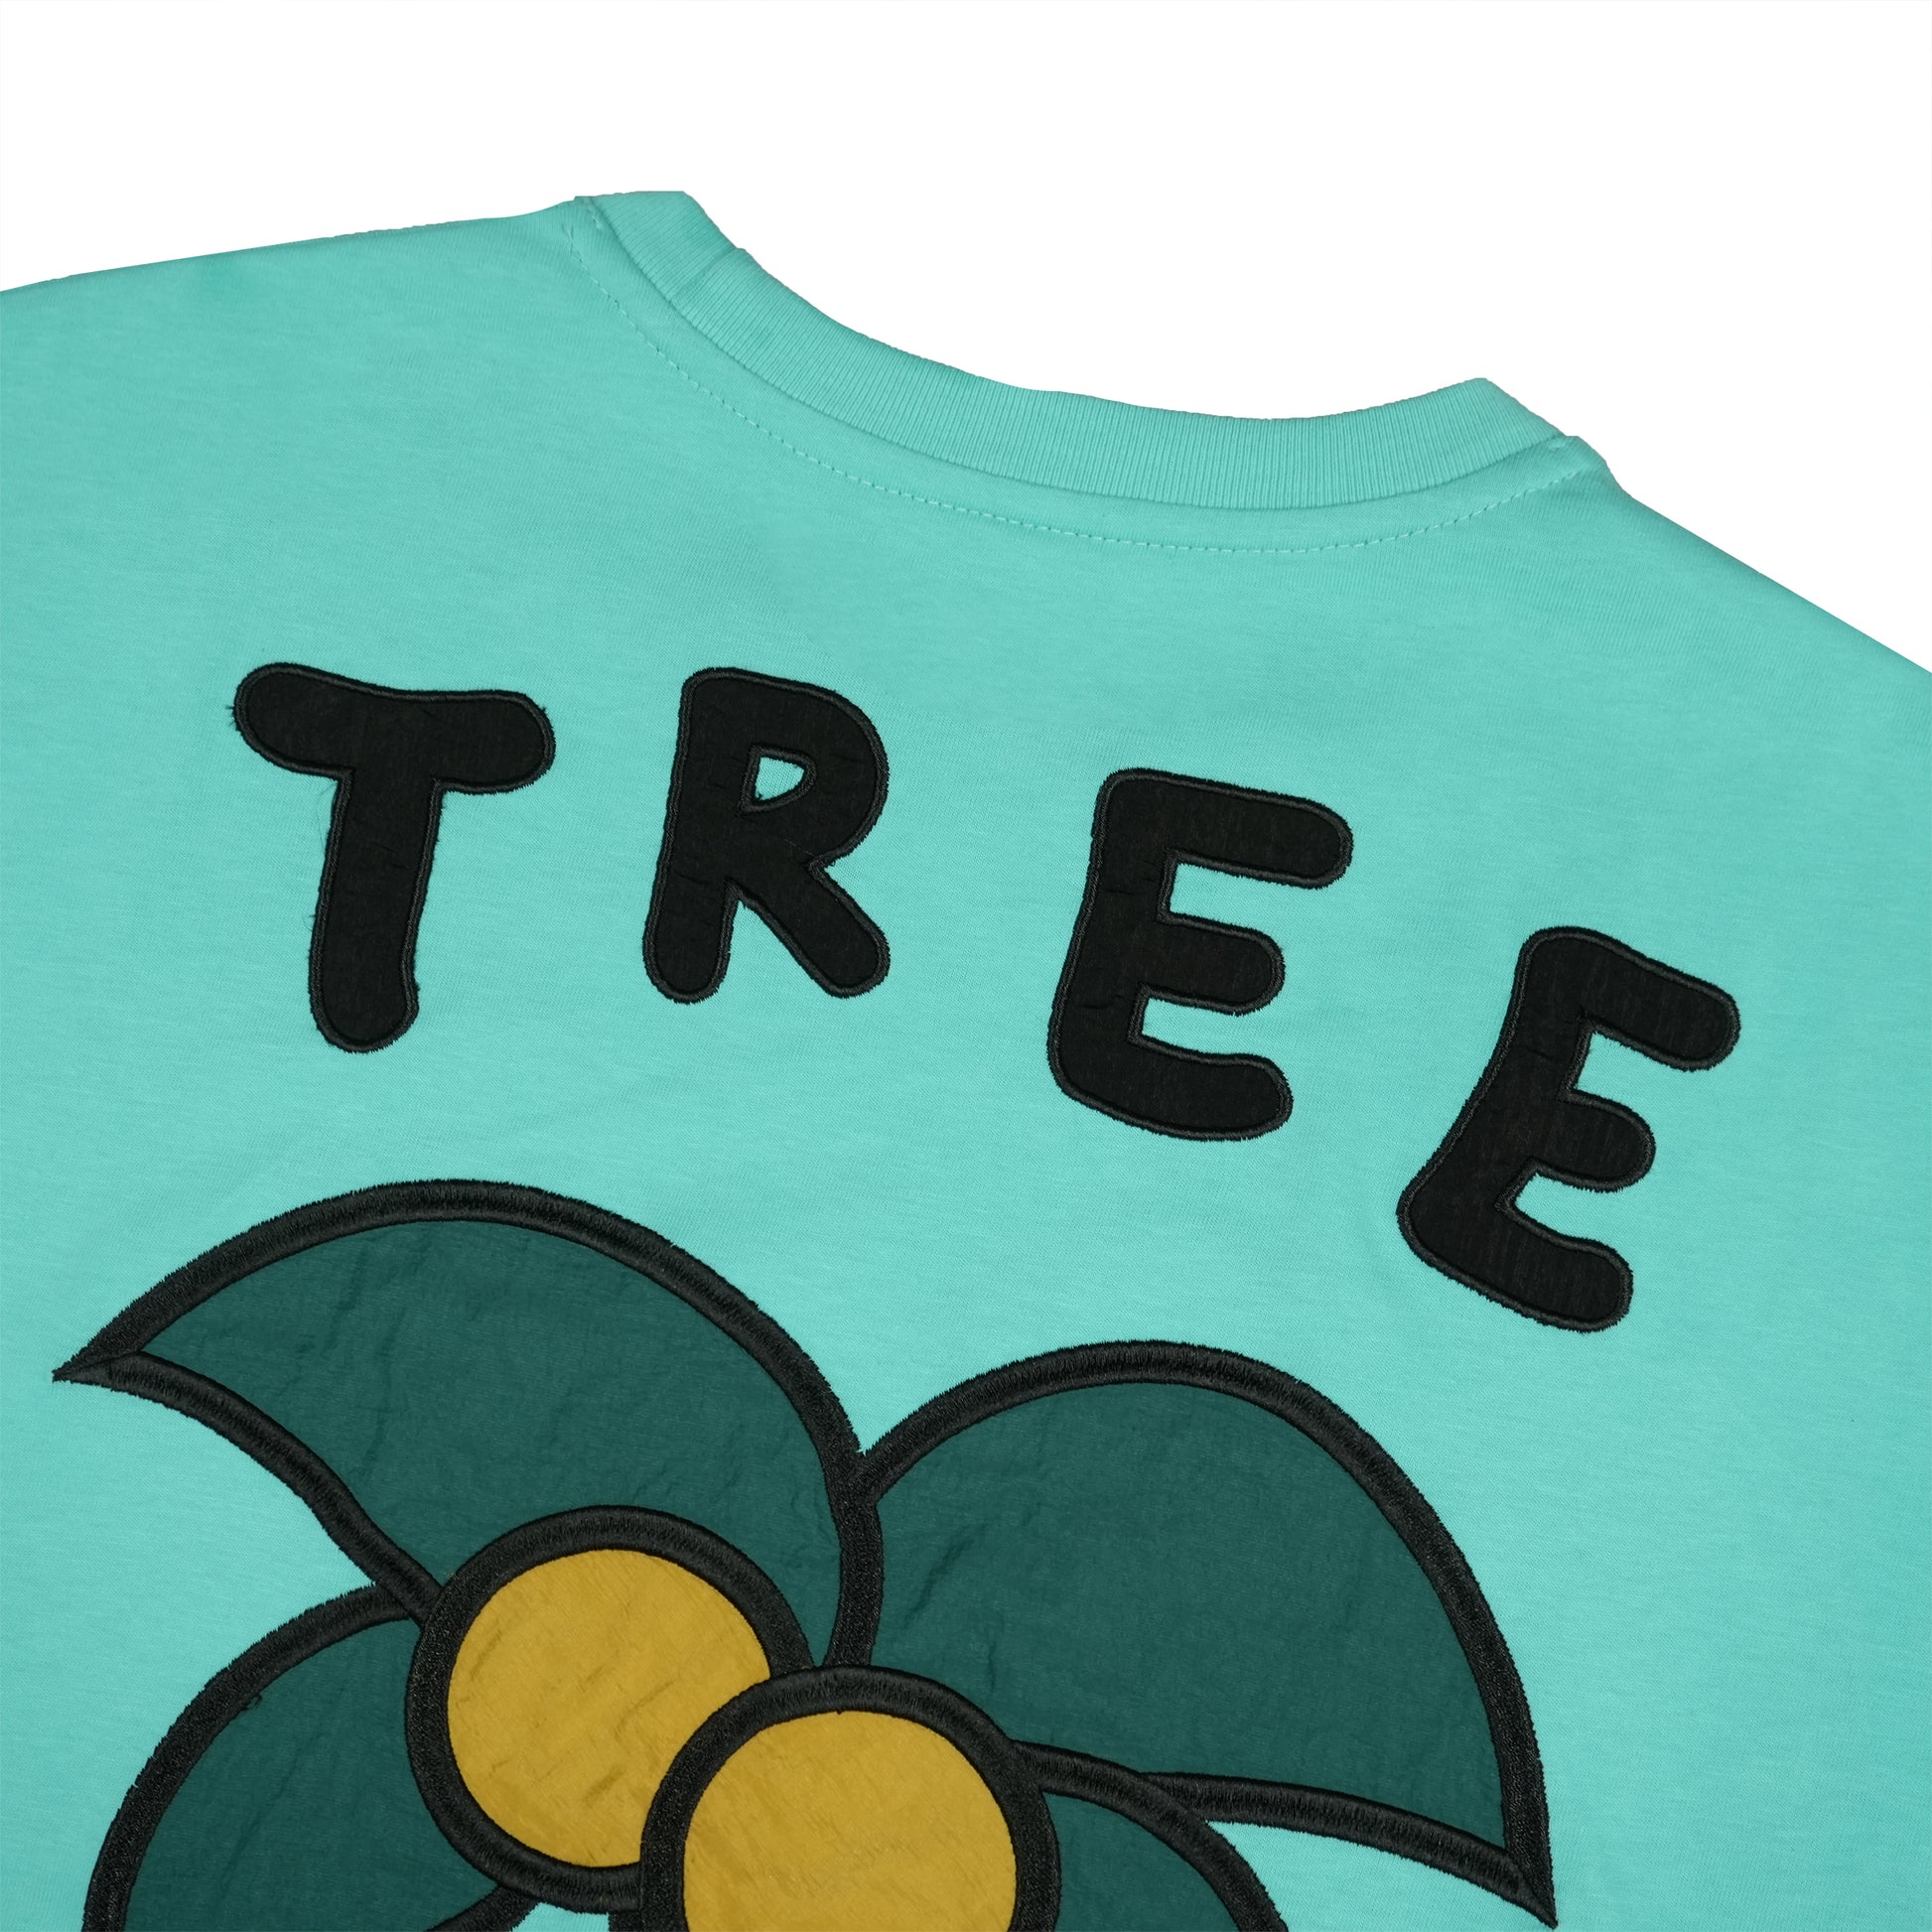 Toson, "Tree" Patchwork T-shirt